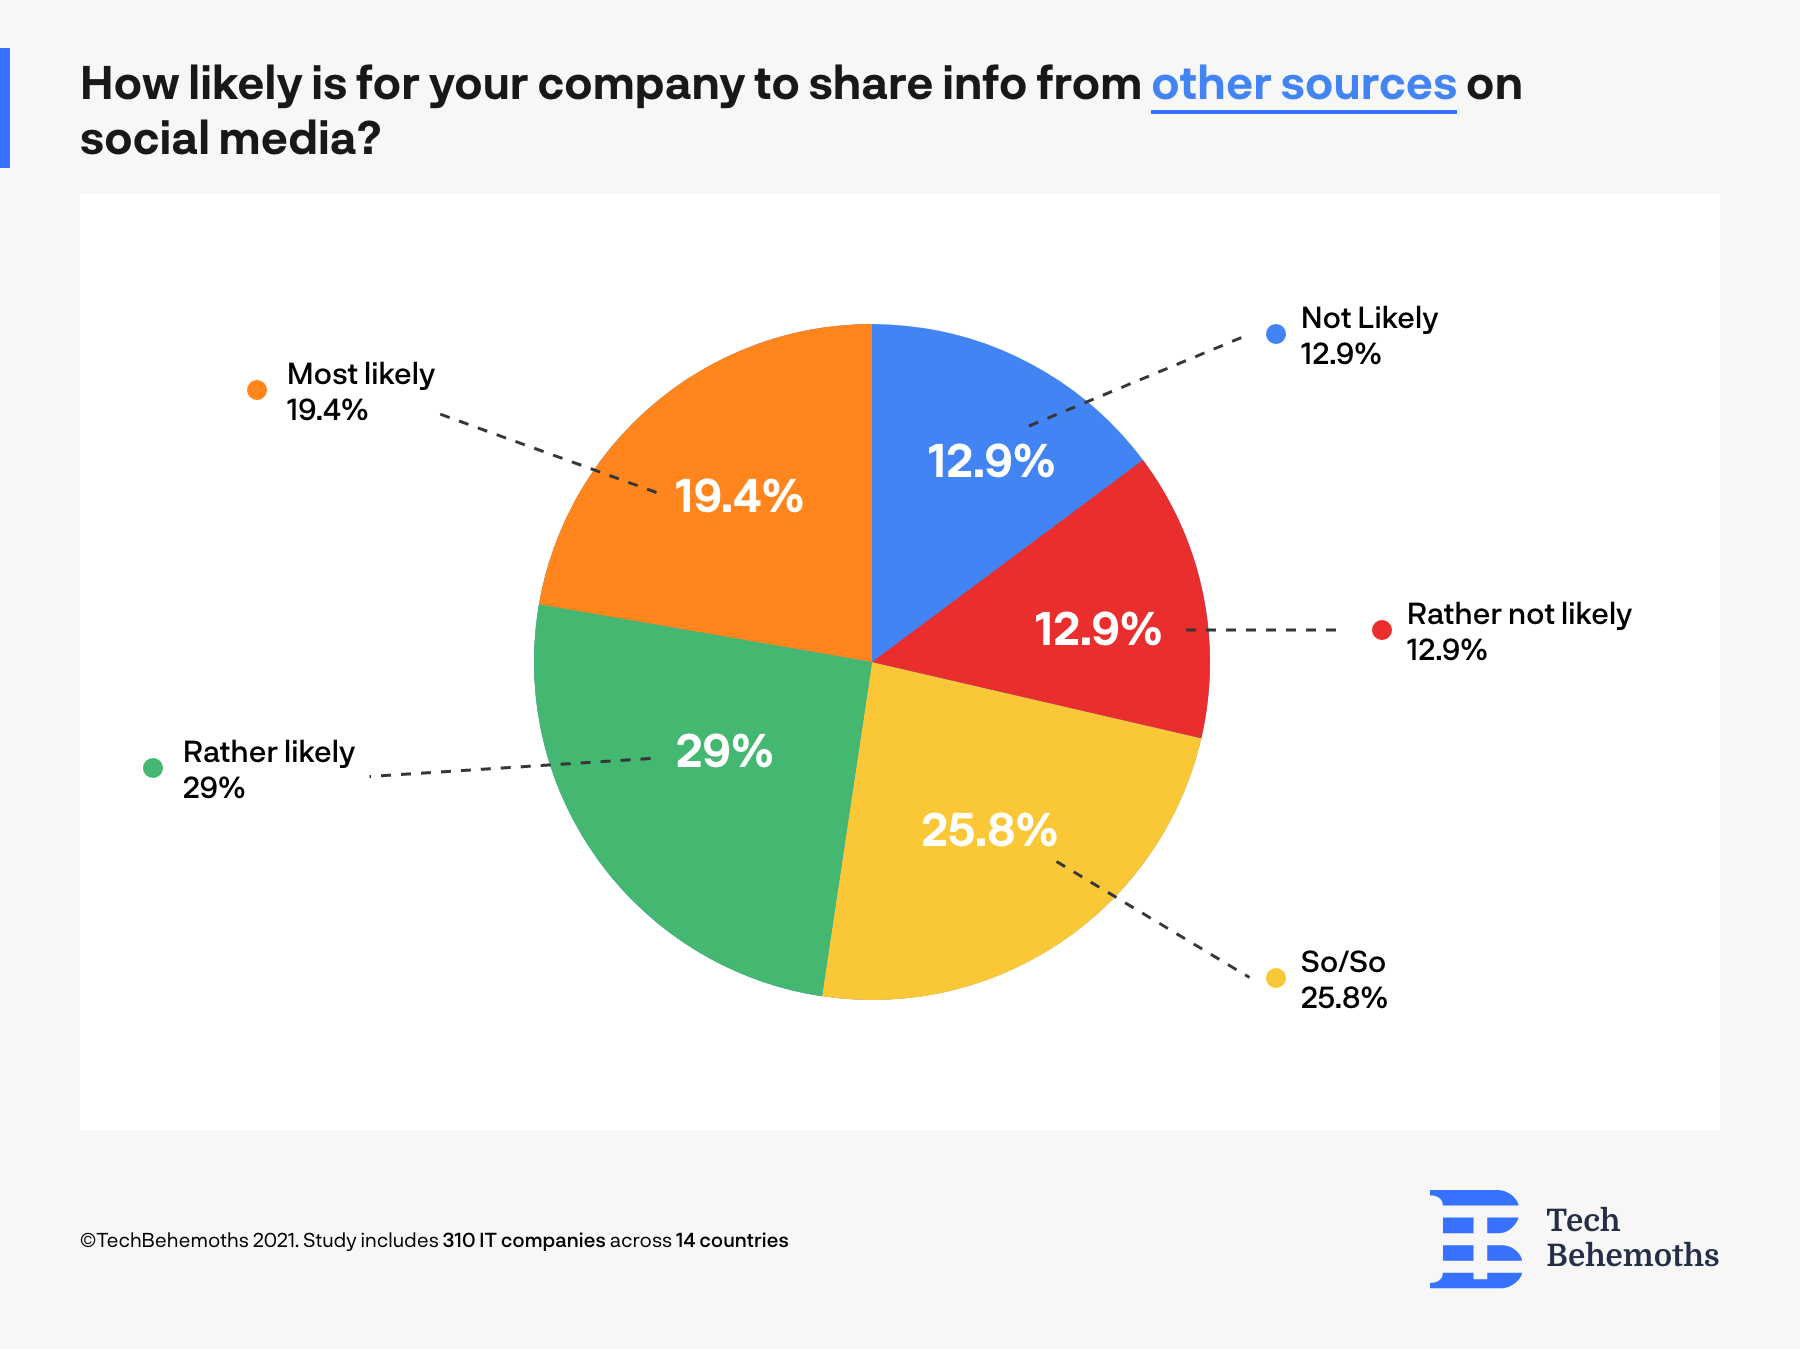 IT companies often share information from other sources on social media channels